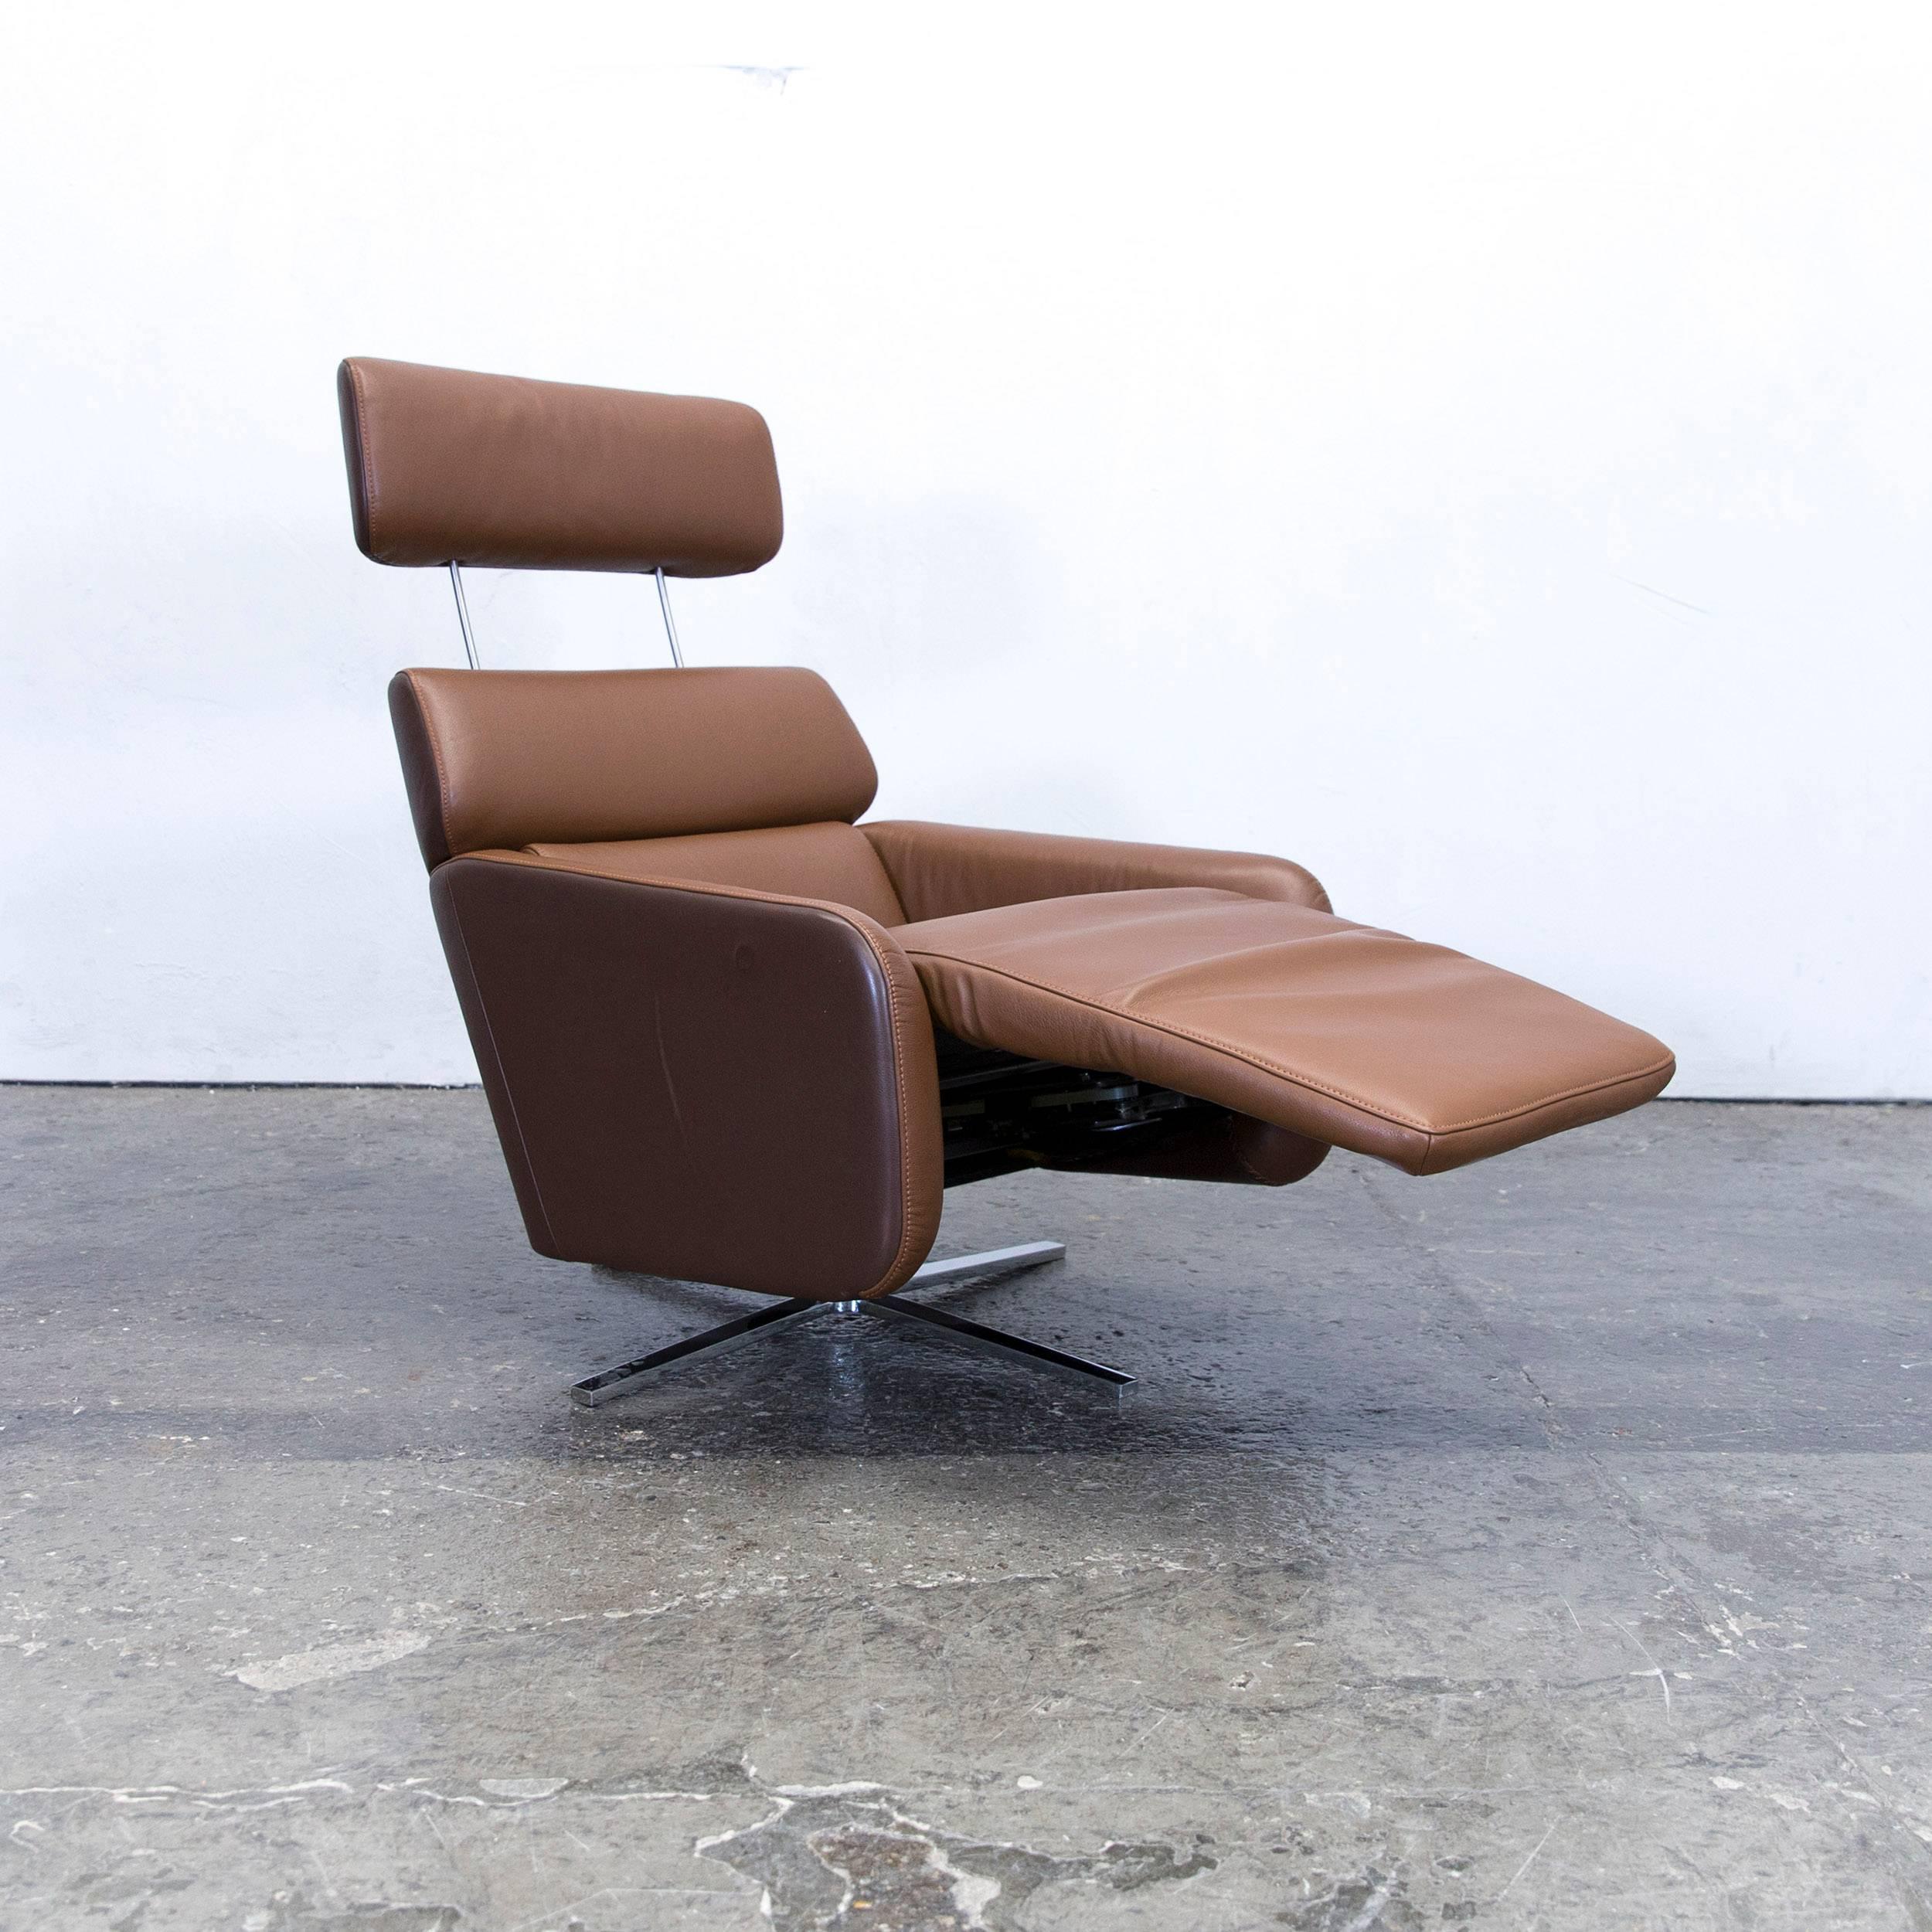 FSM Ergo Designer Relax Armchair Leather Brown One Seat Couch Modern In Good Condition For Sale In Cologne, DE